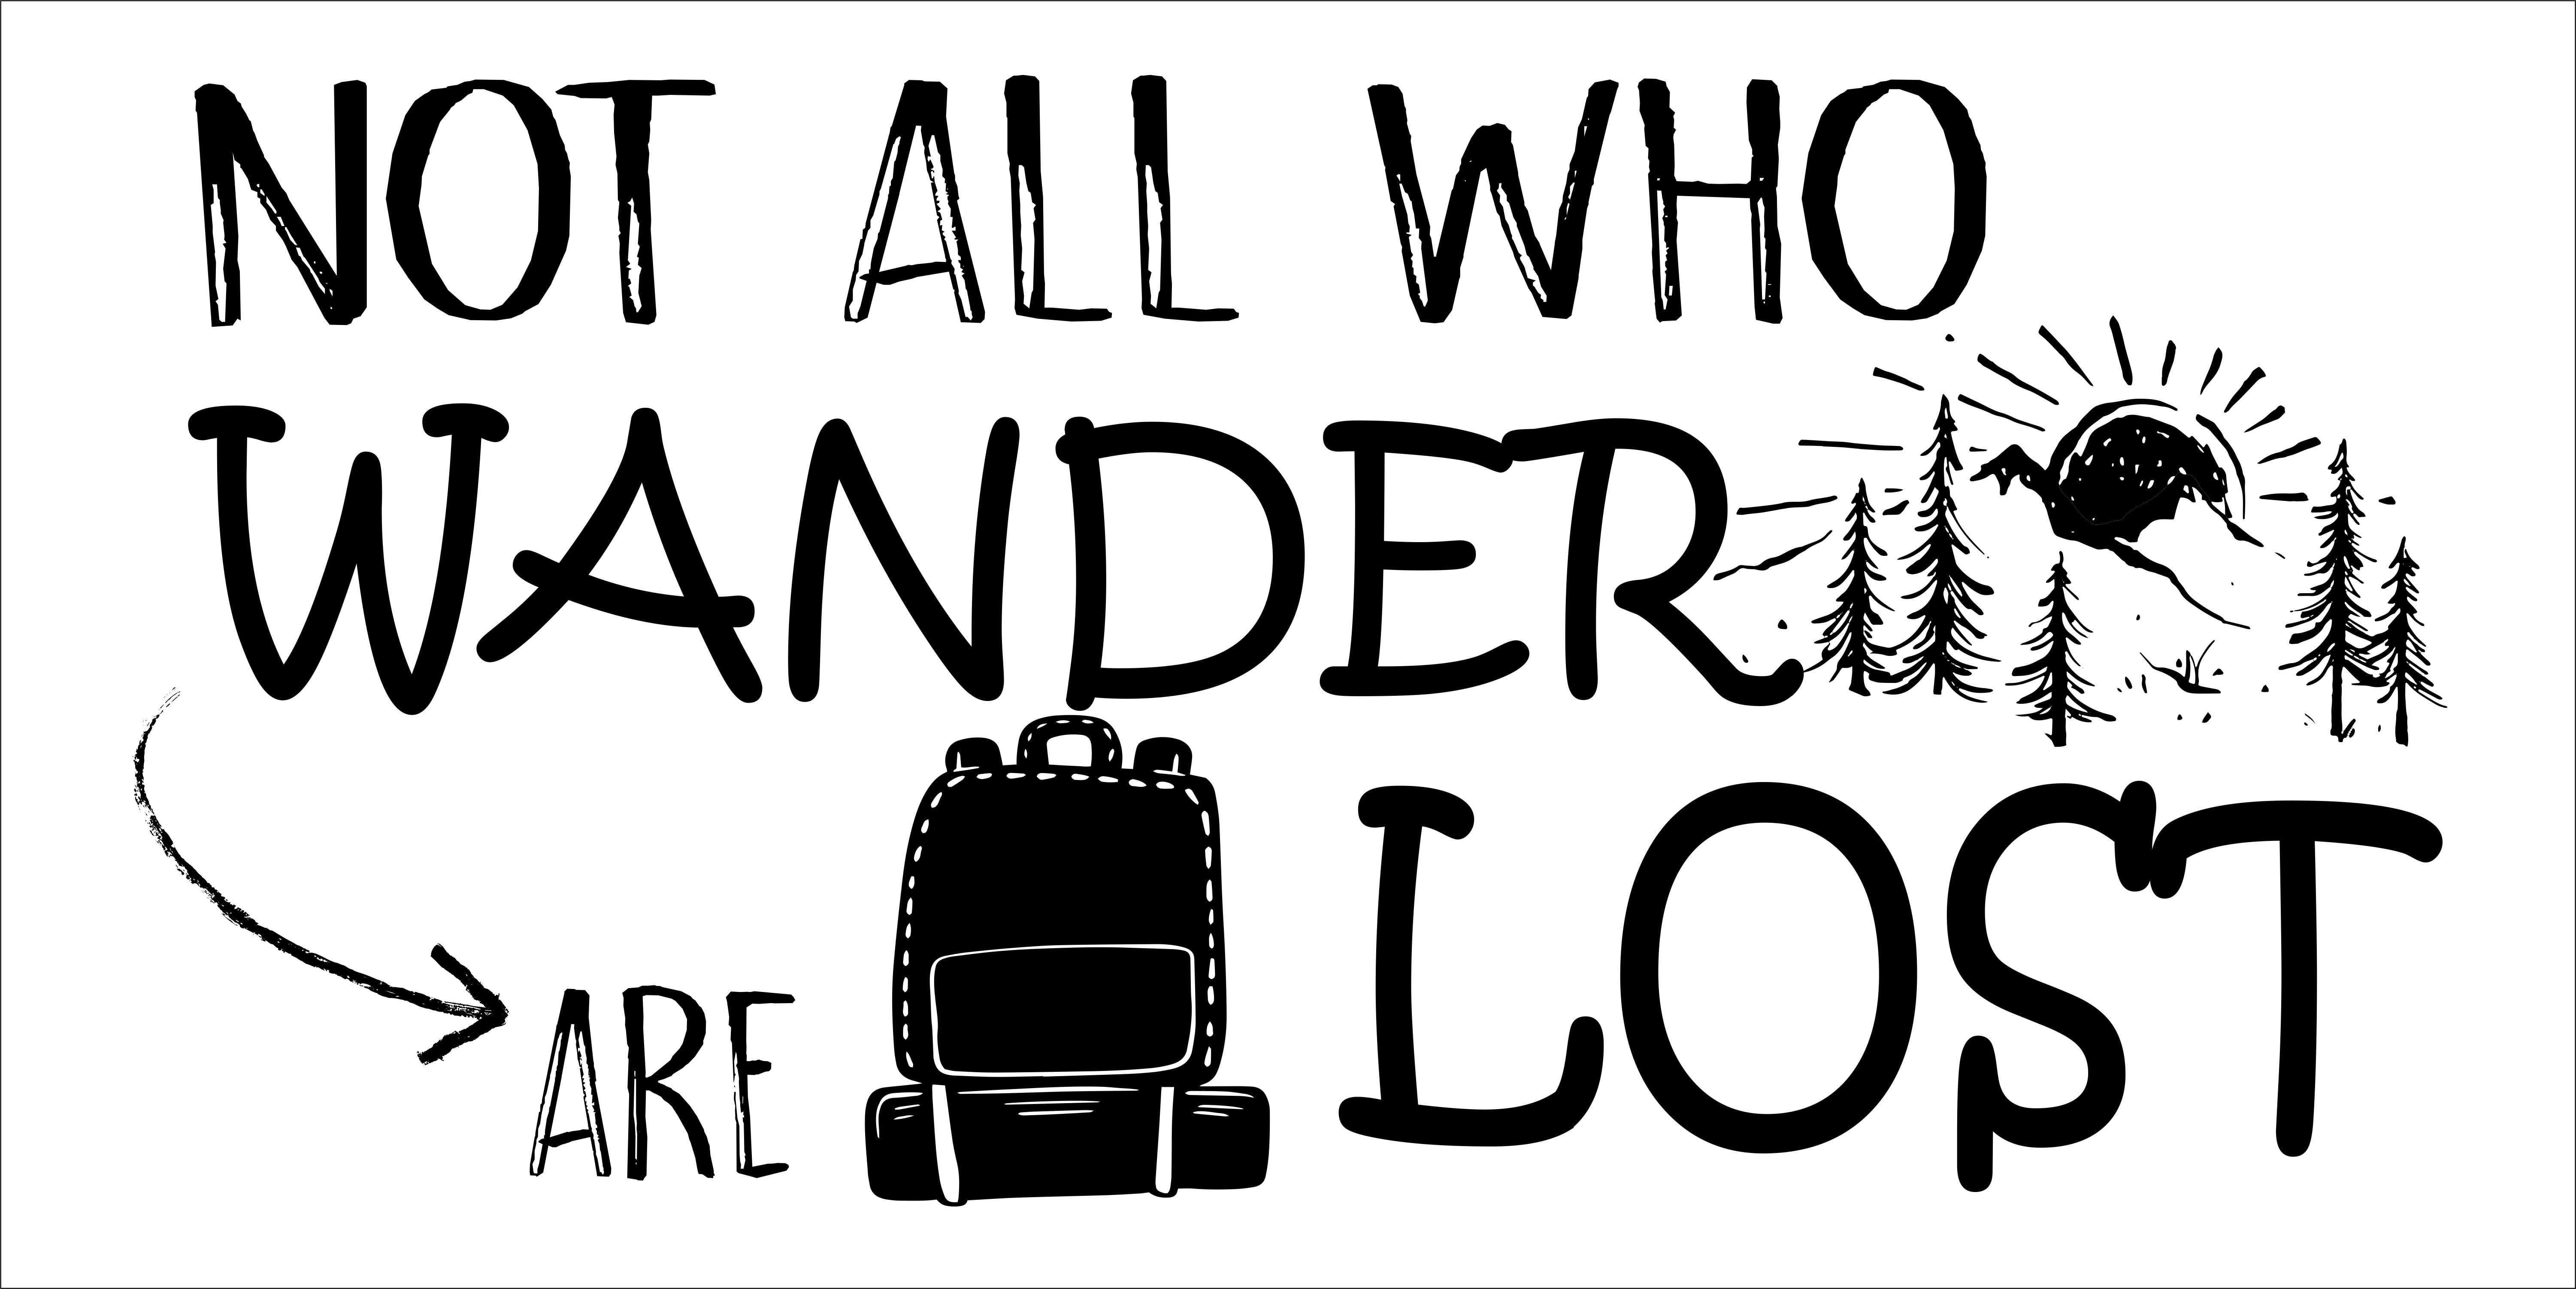 Not All Who Wander Are Lost - DIY Hiking Quotes Wall Decal | 10